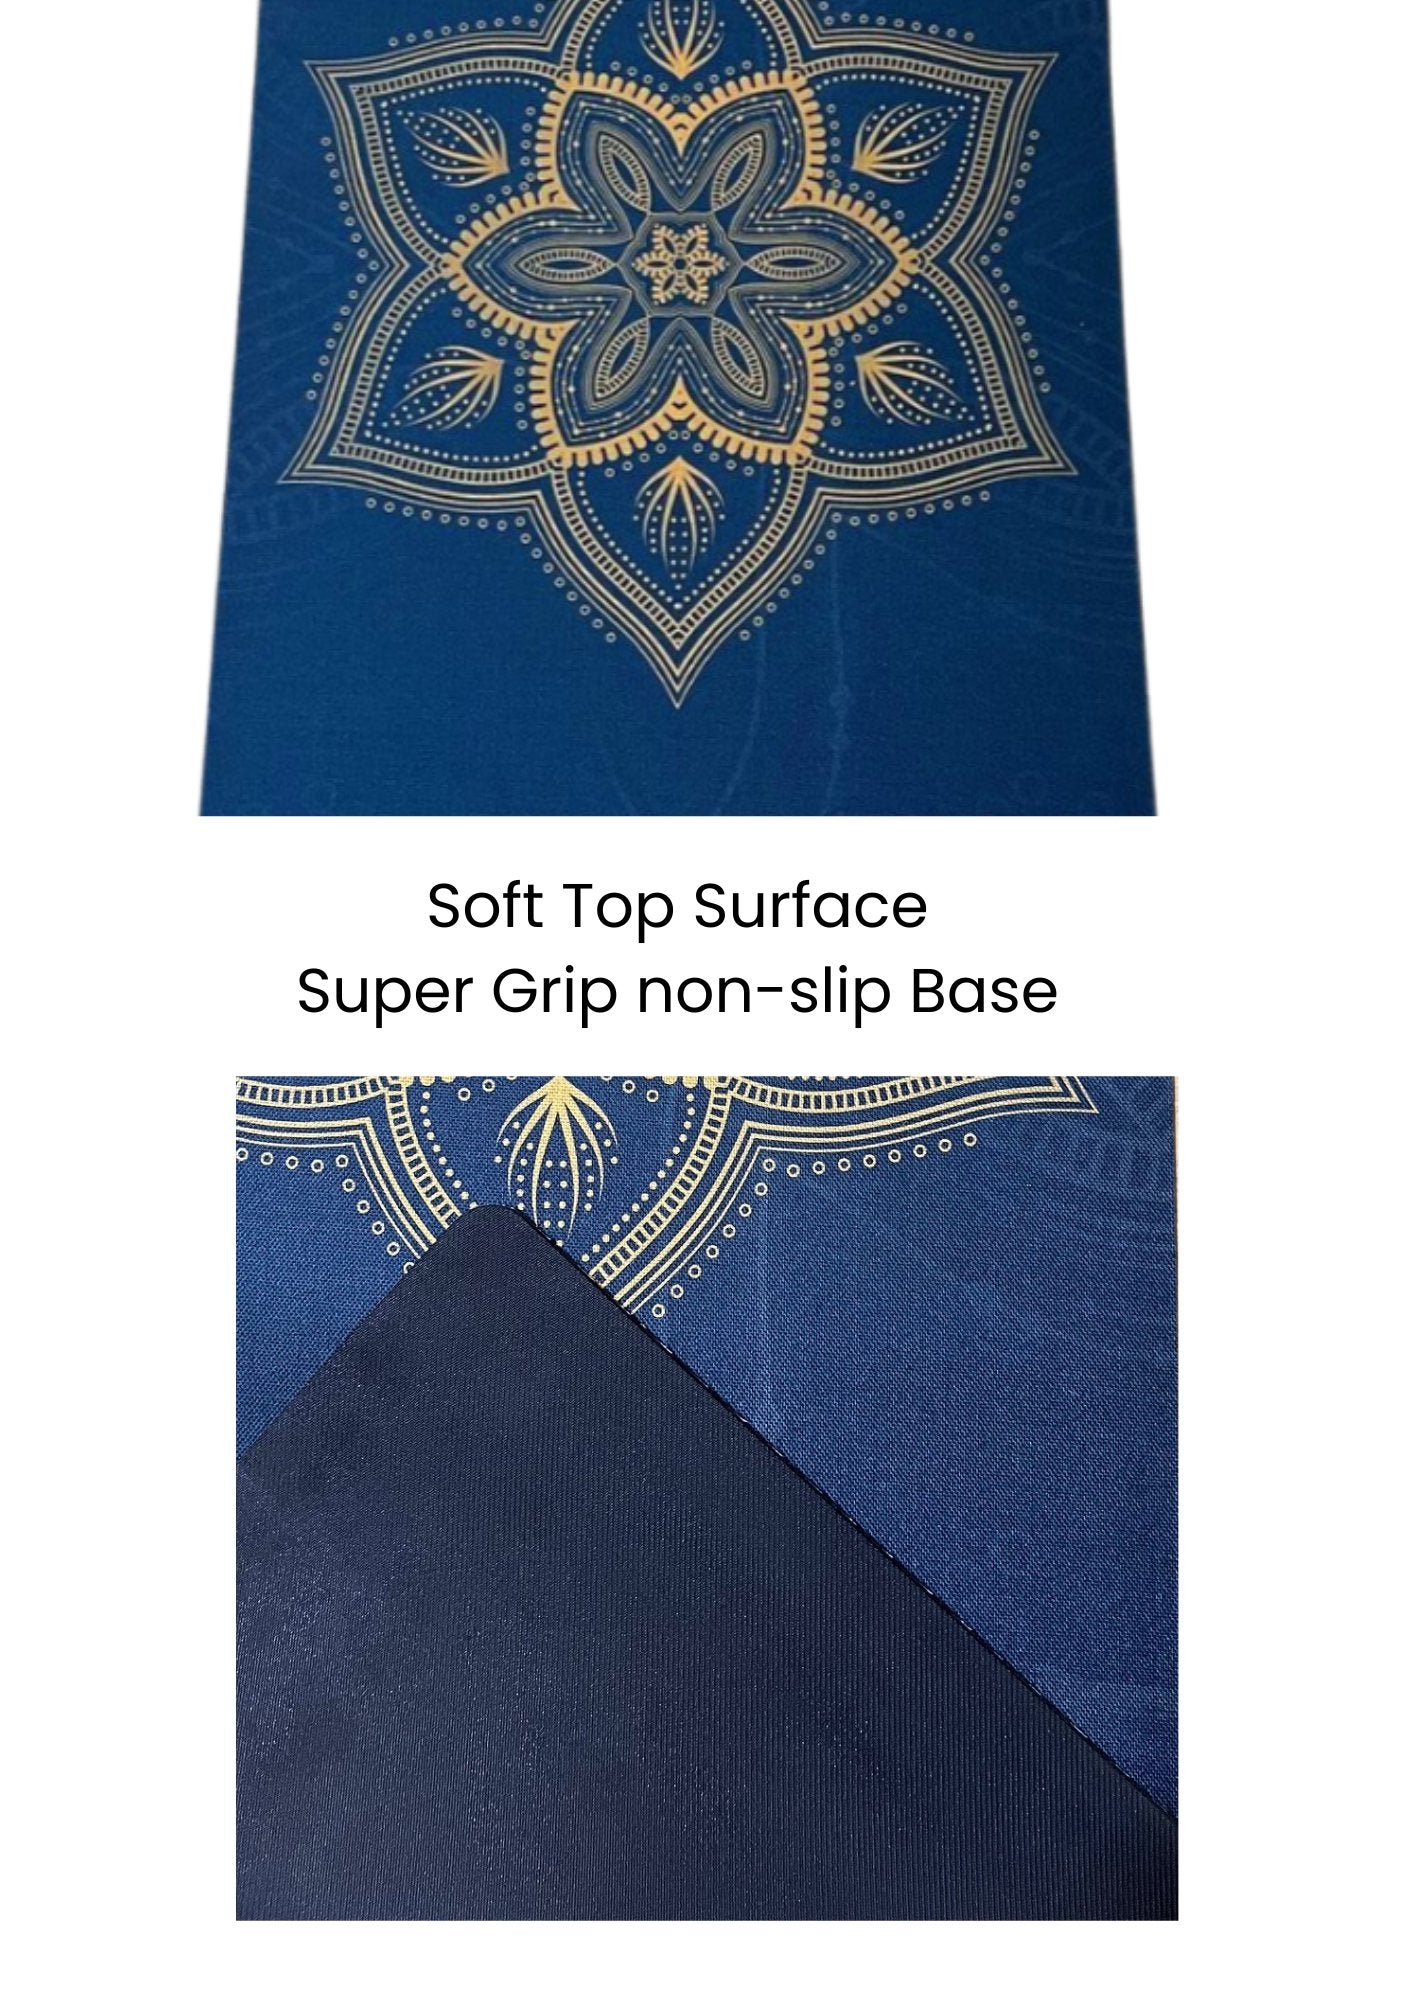 "Soft top hemp jute yoga mat: Eco-conscious design with a super grip non-slip base for added stability."